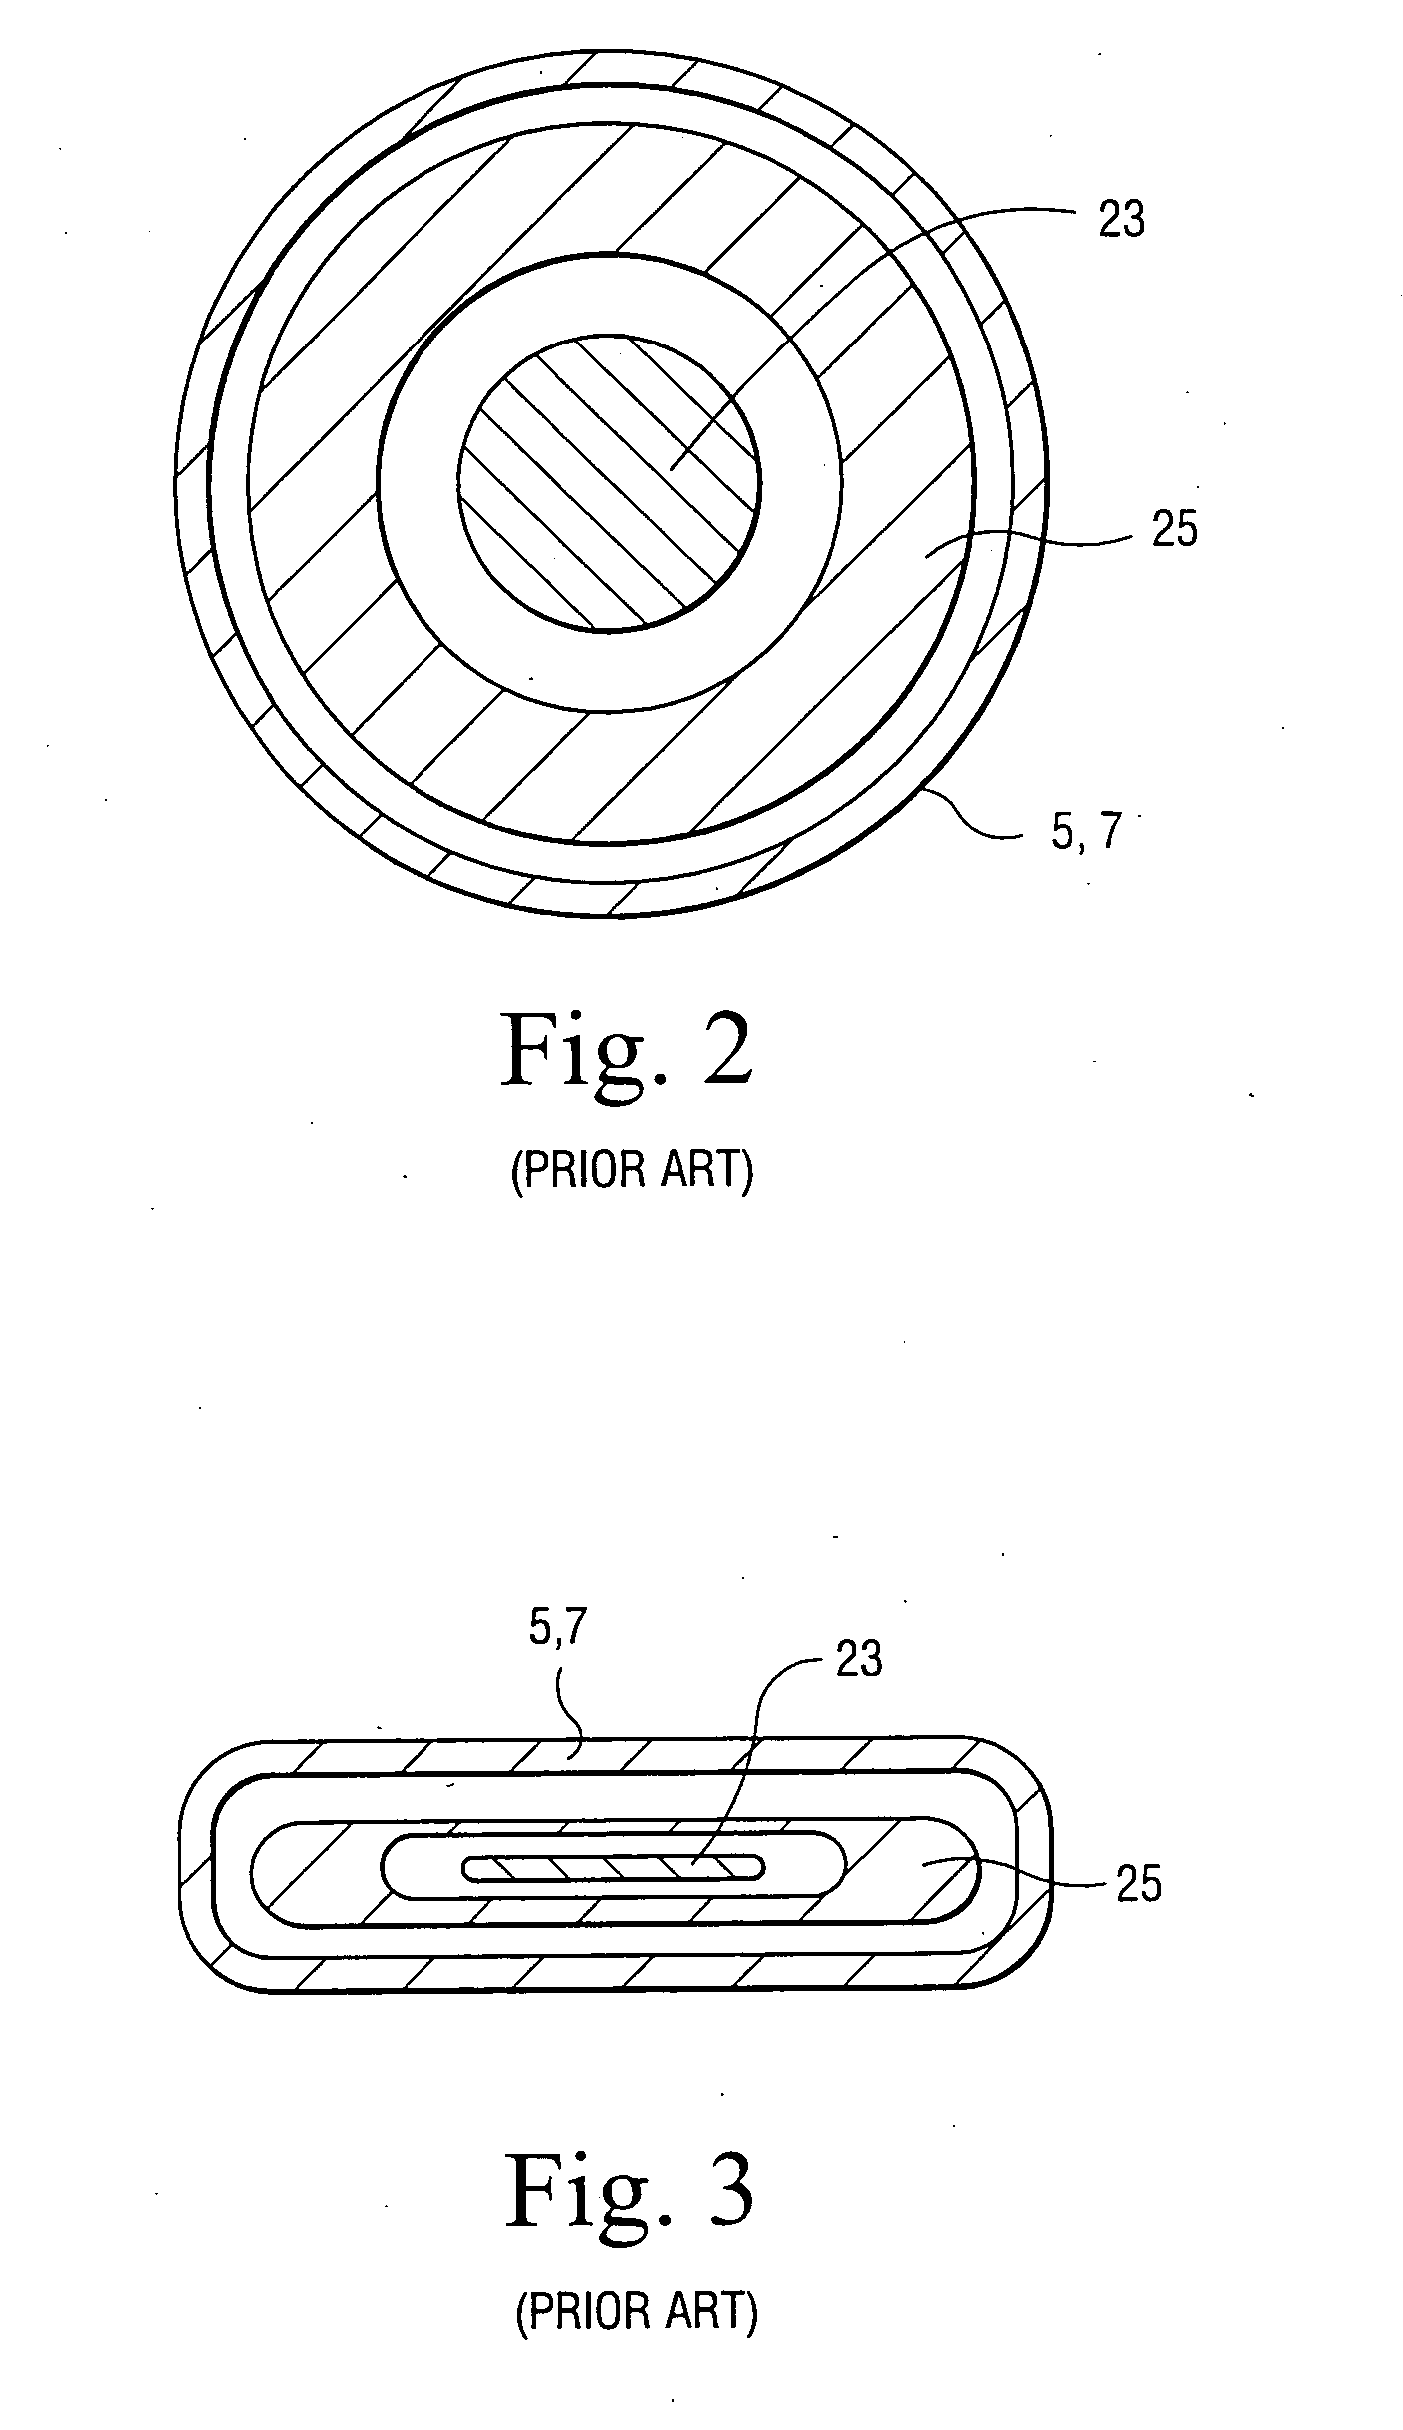 Ion source with substantially planar design